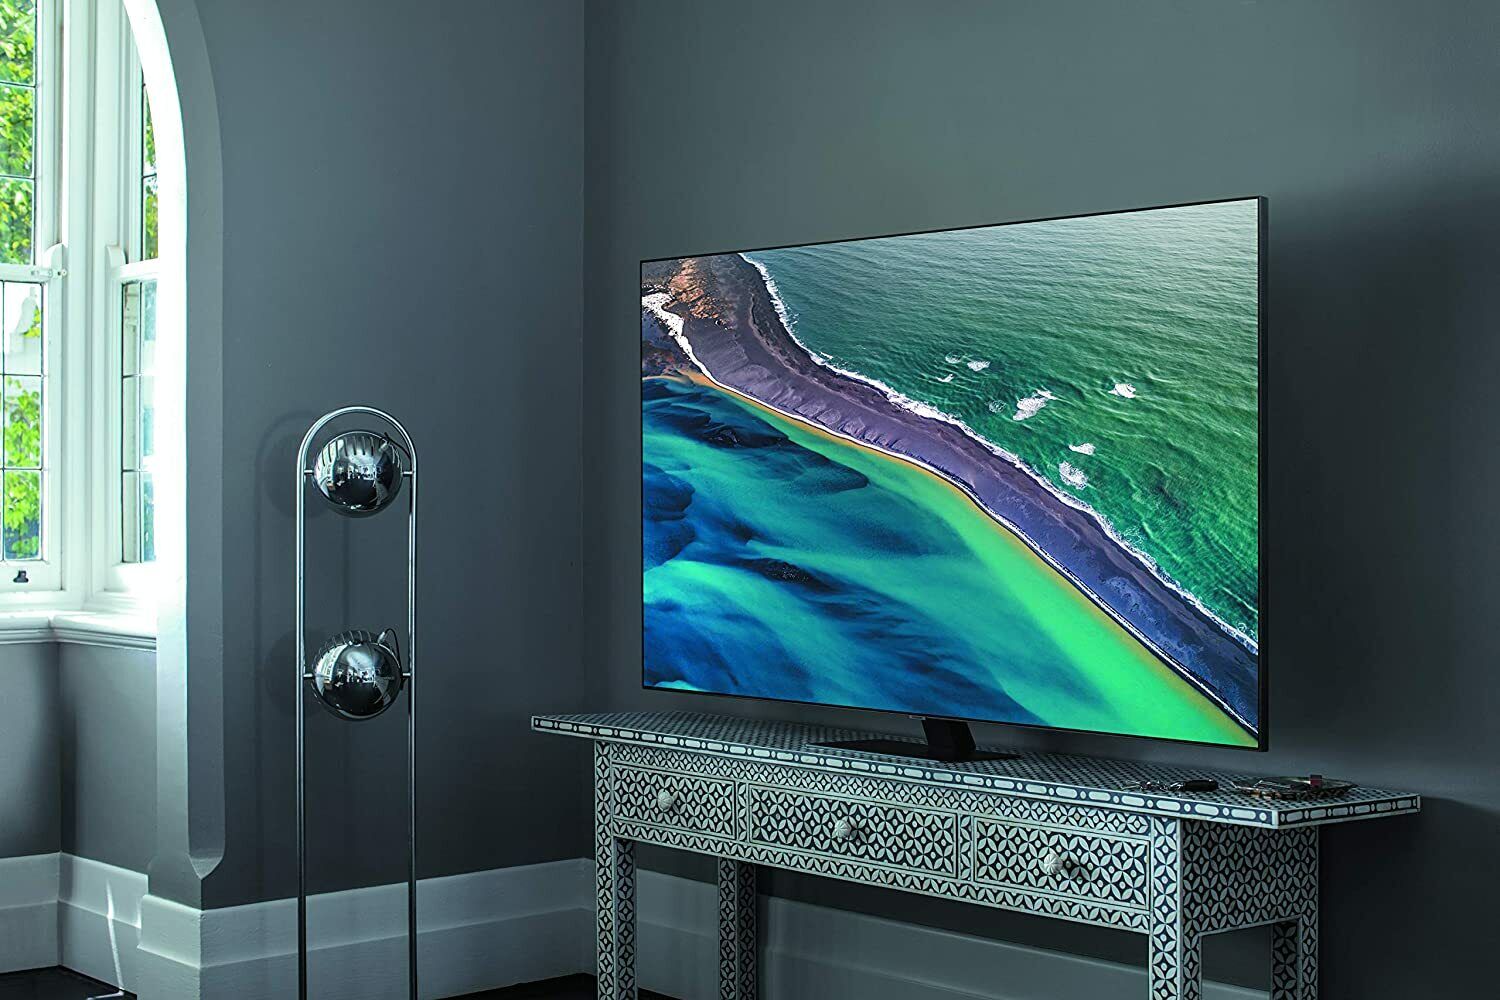 Samsung QLED Q80A: Elevating Picture Quality